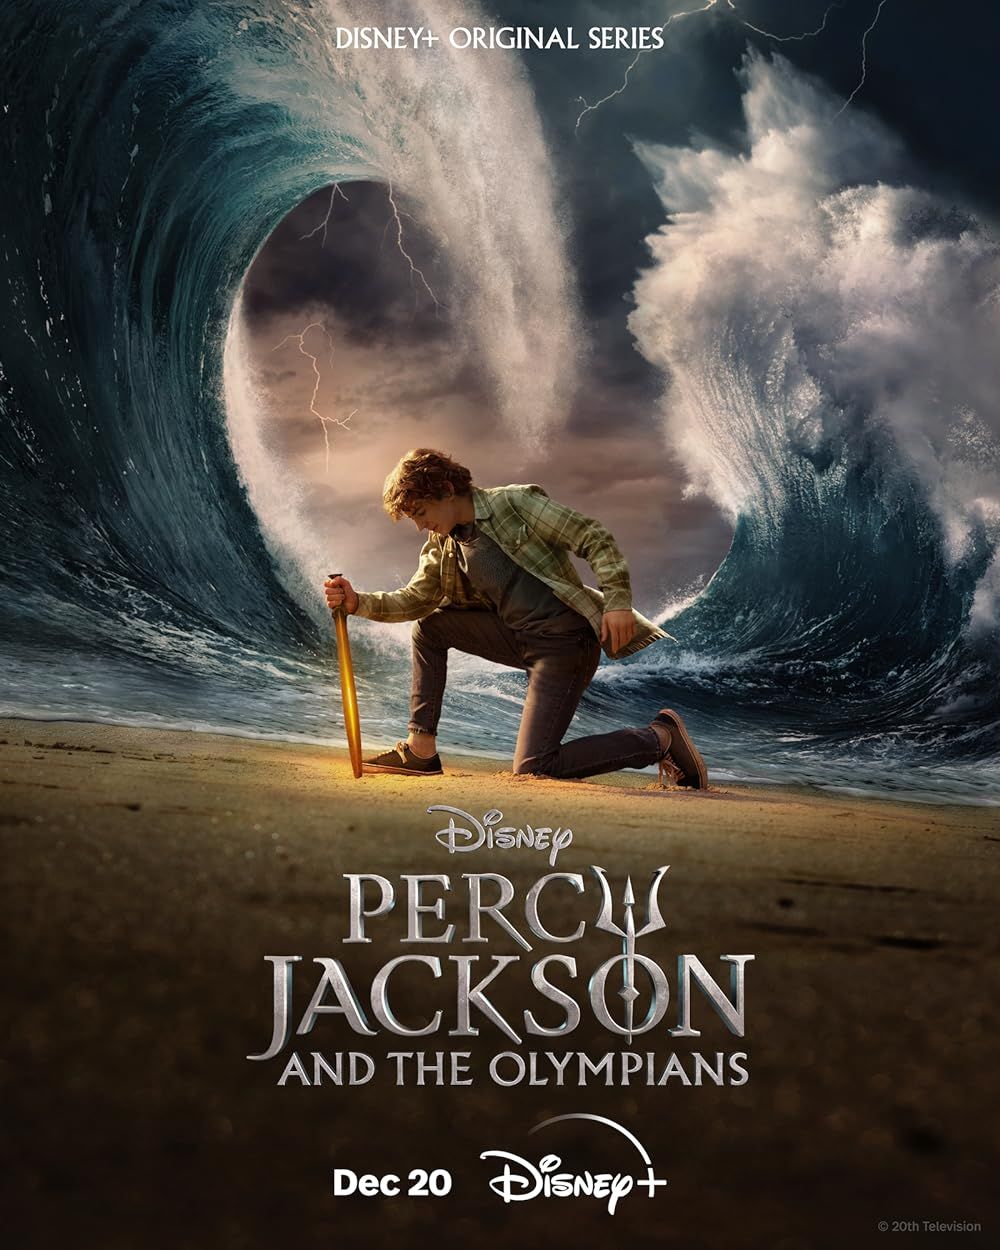 Percy Jackson and the Olympus promo shows Percy Jackson holding his sword as waves crash behind him.